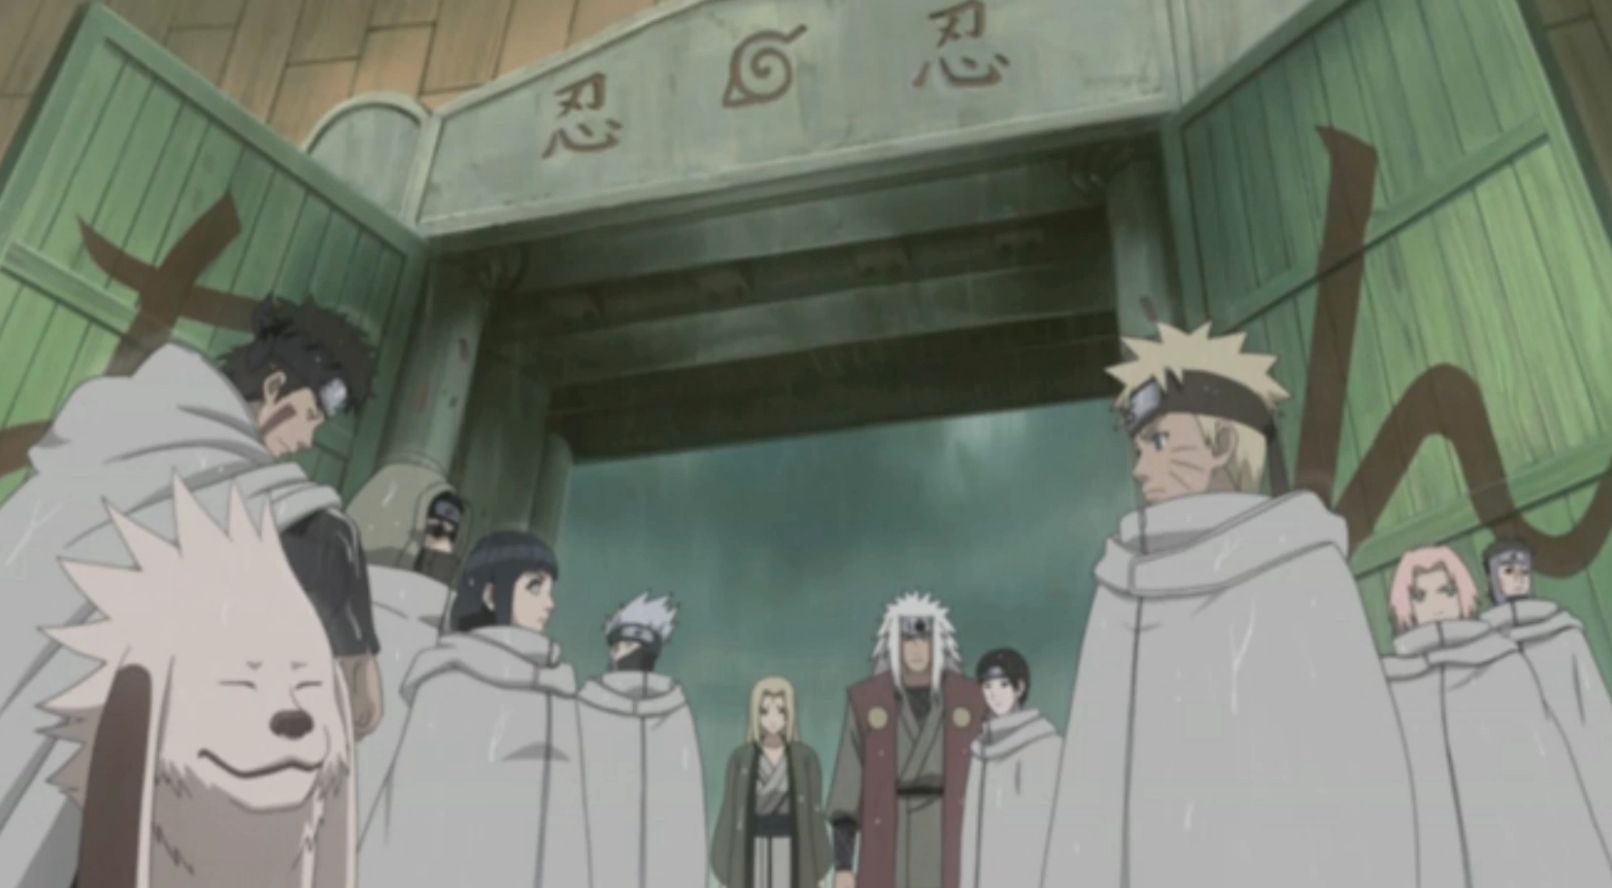 Naruto The 20 Most Powerful Ninja Teams (And 10 Weakest) Officially Ranked